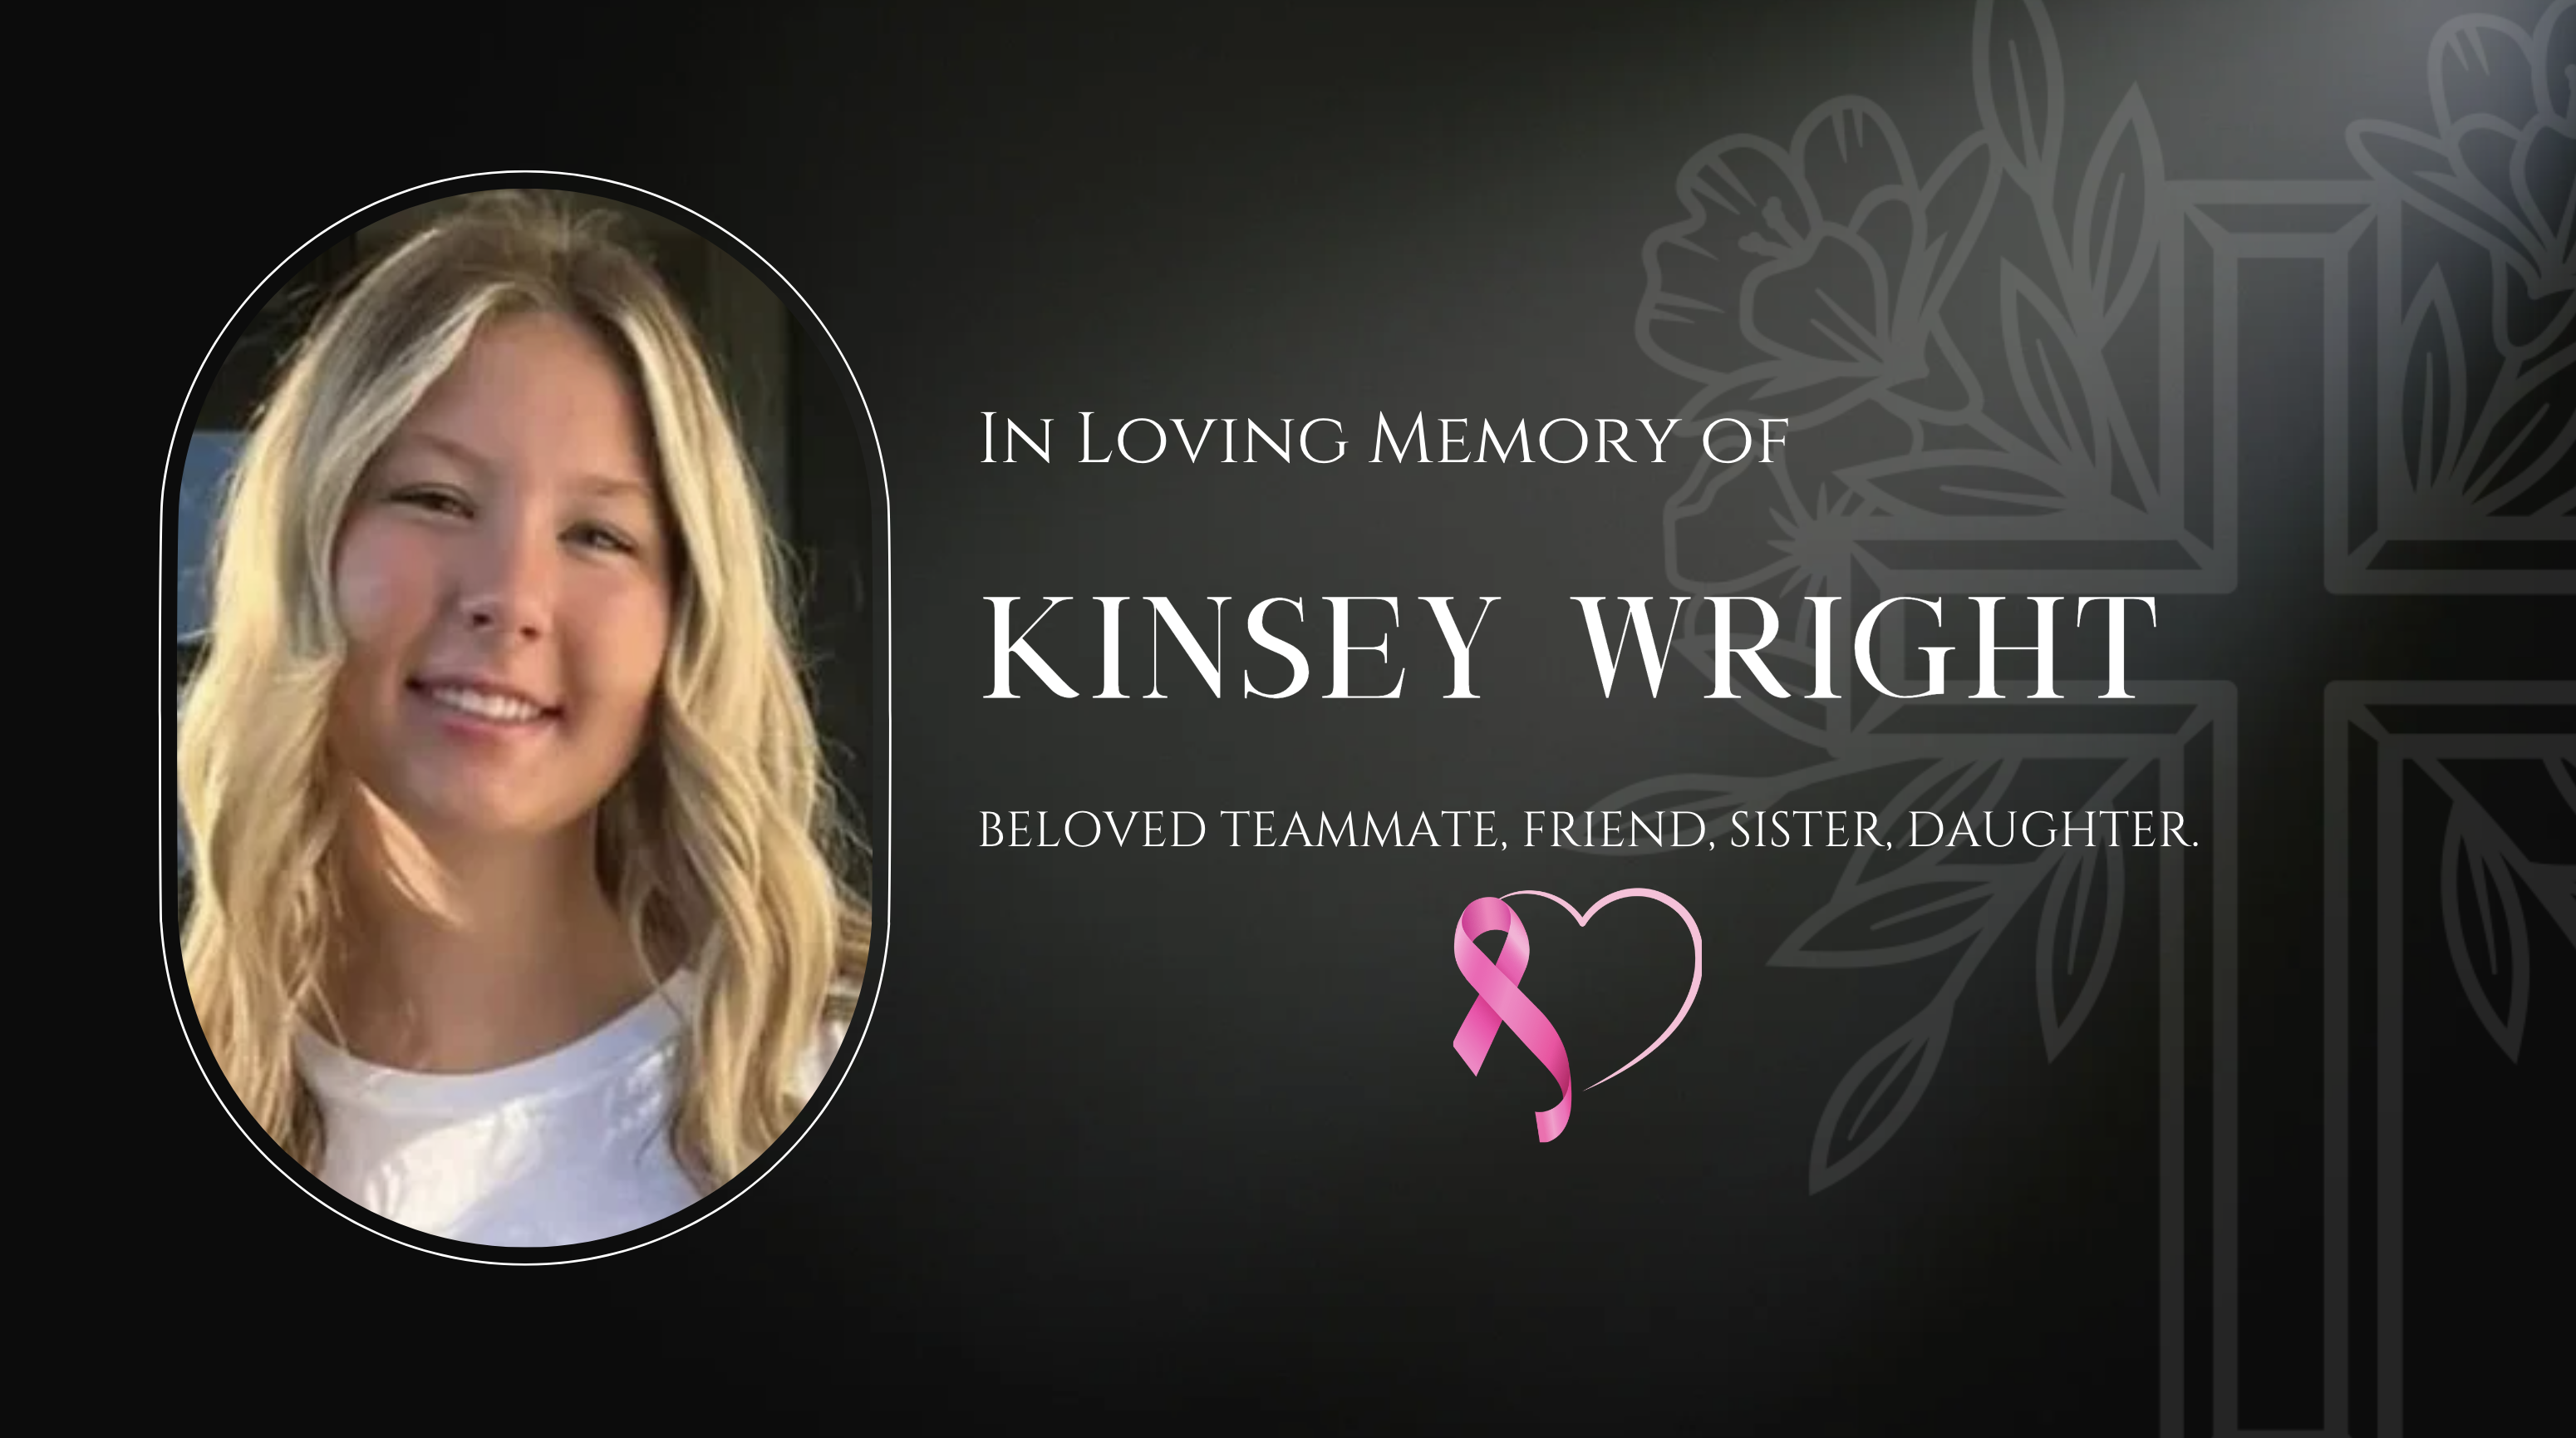 KINSEY WRIGHT, OUR BELOVED